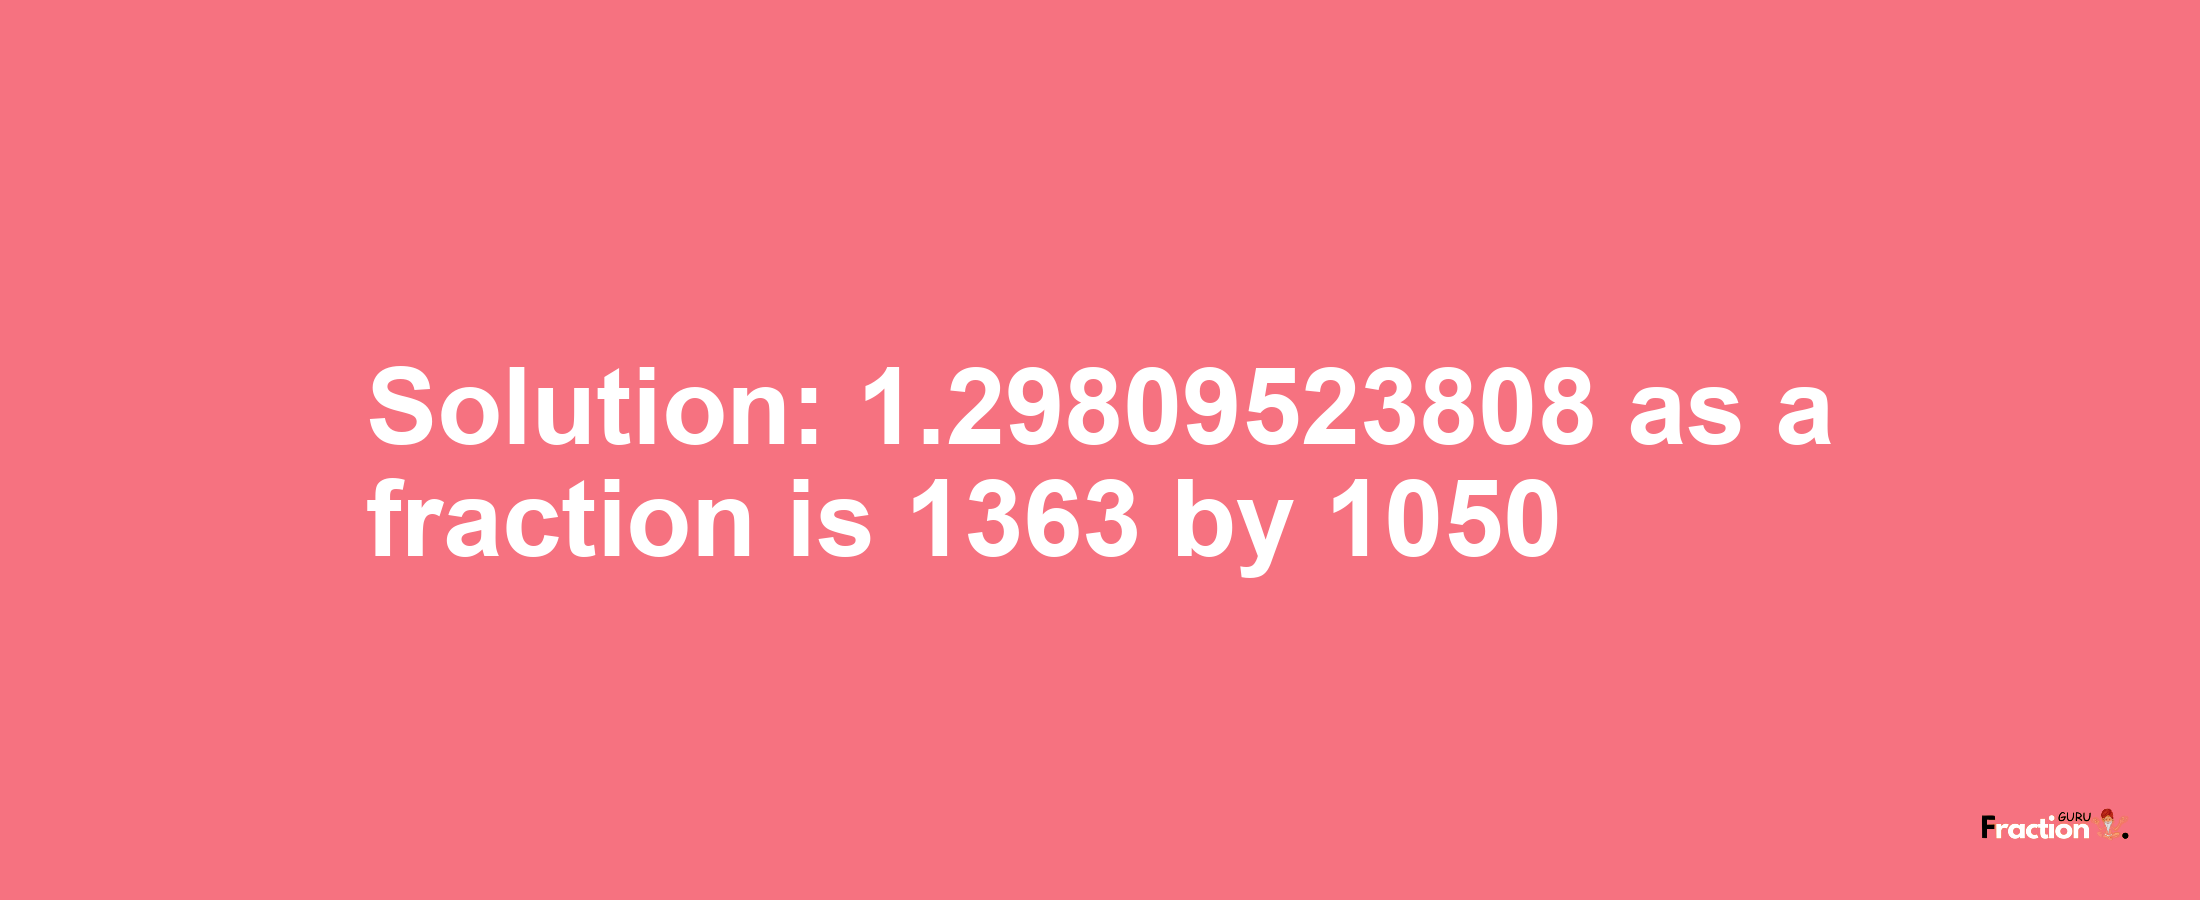 Solution:1.29809523808 as a fraction is 1363/1050